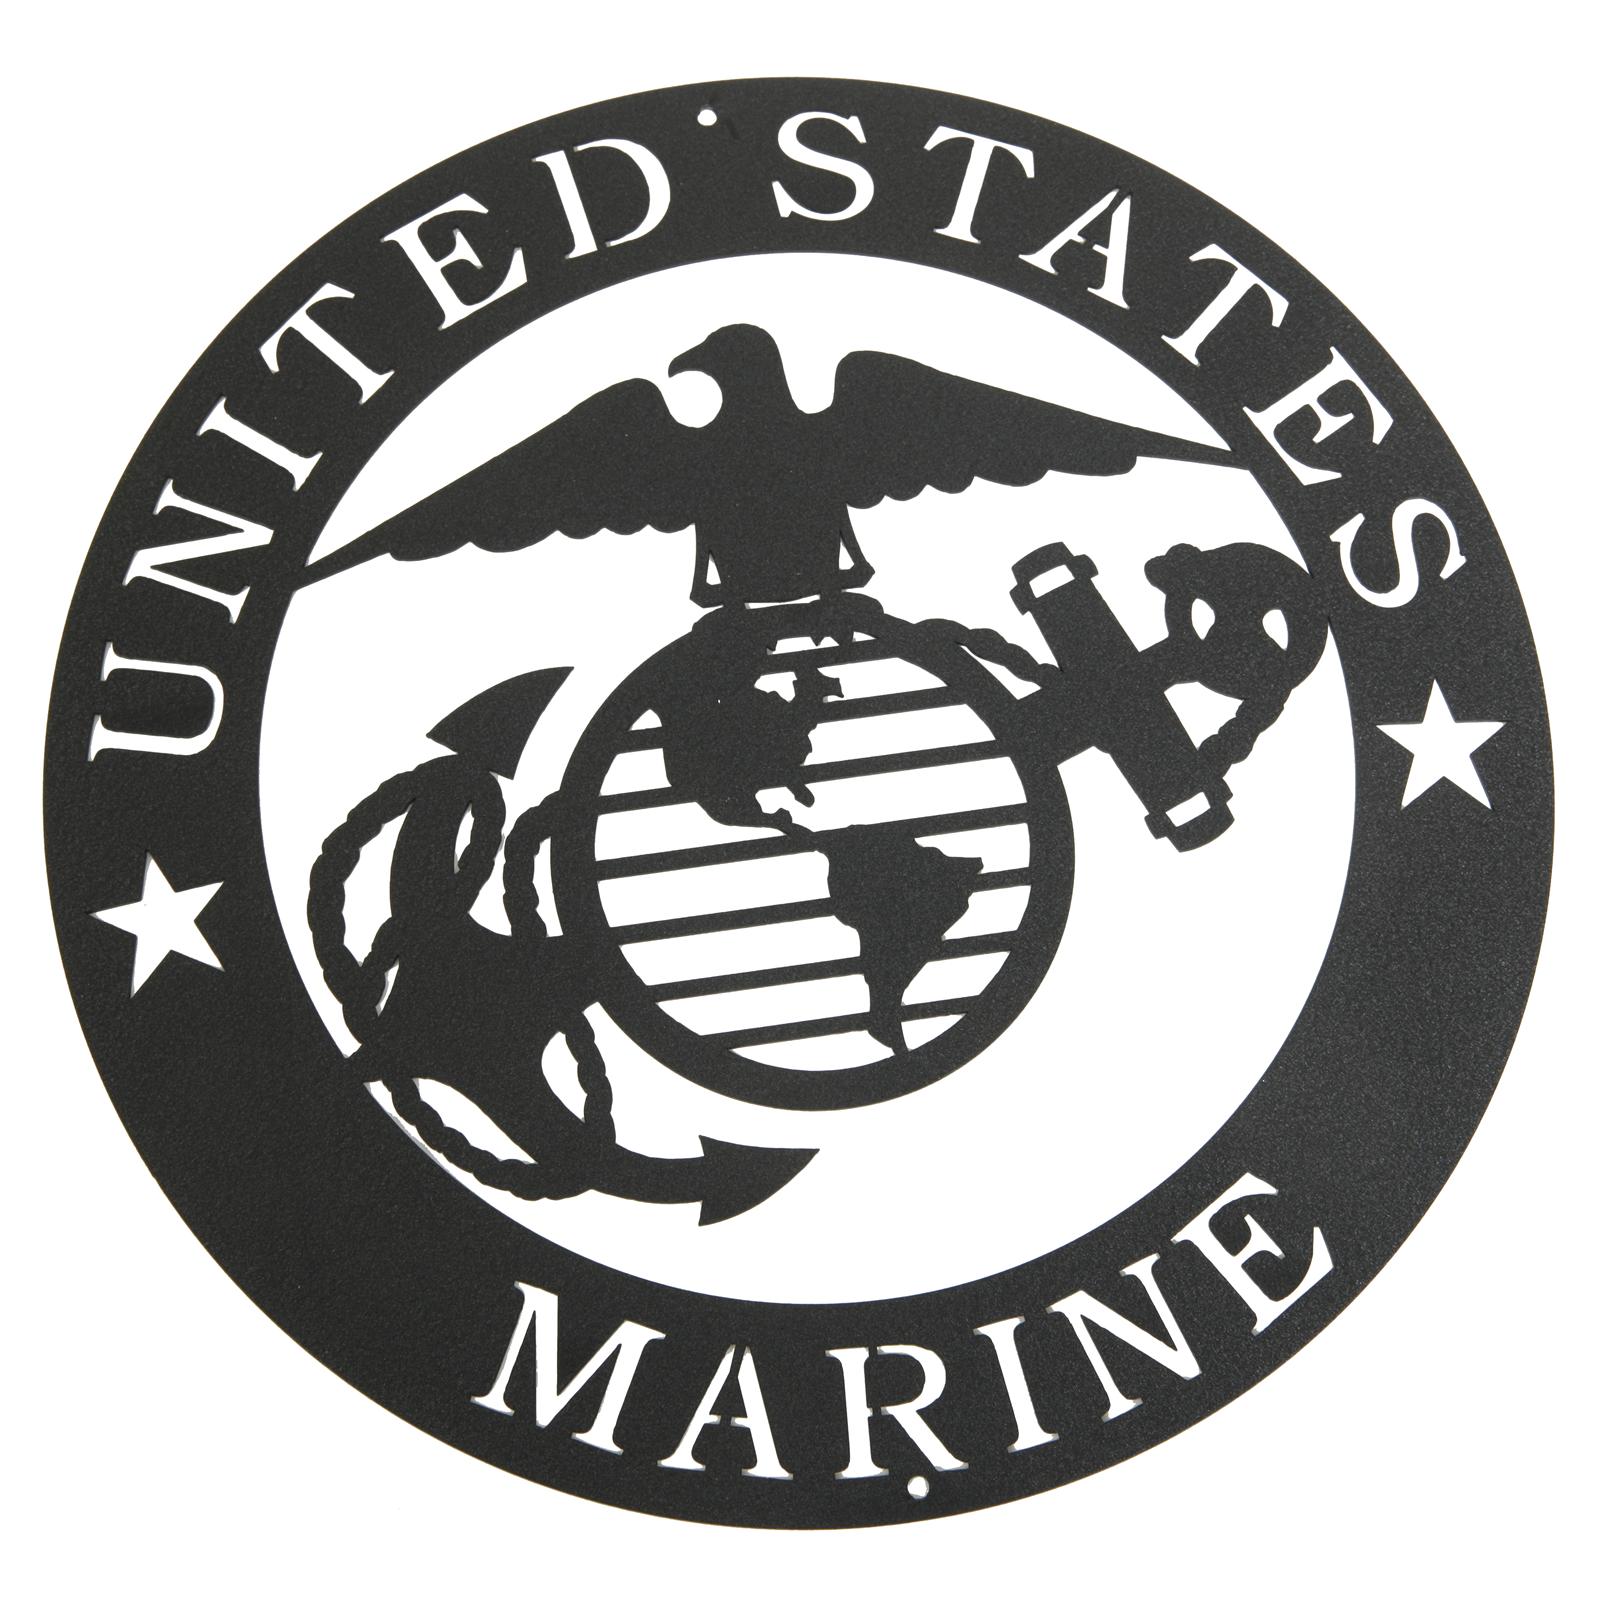 Marines Corps Emblem Metal Silhouette 3025 - Free Shipping on Orders